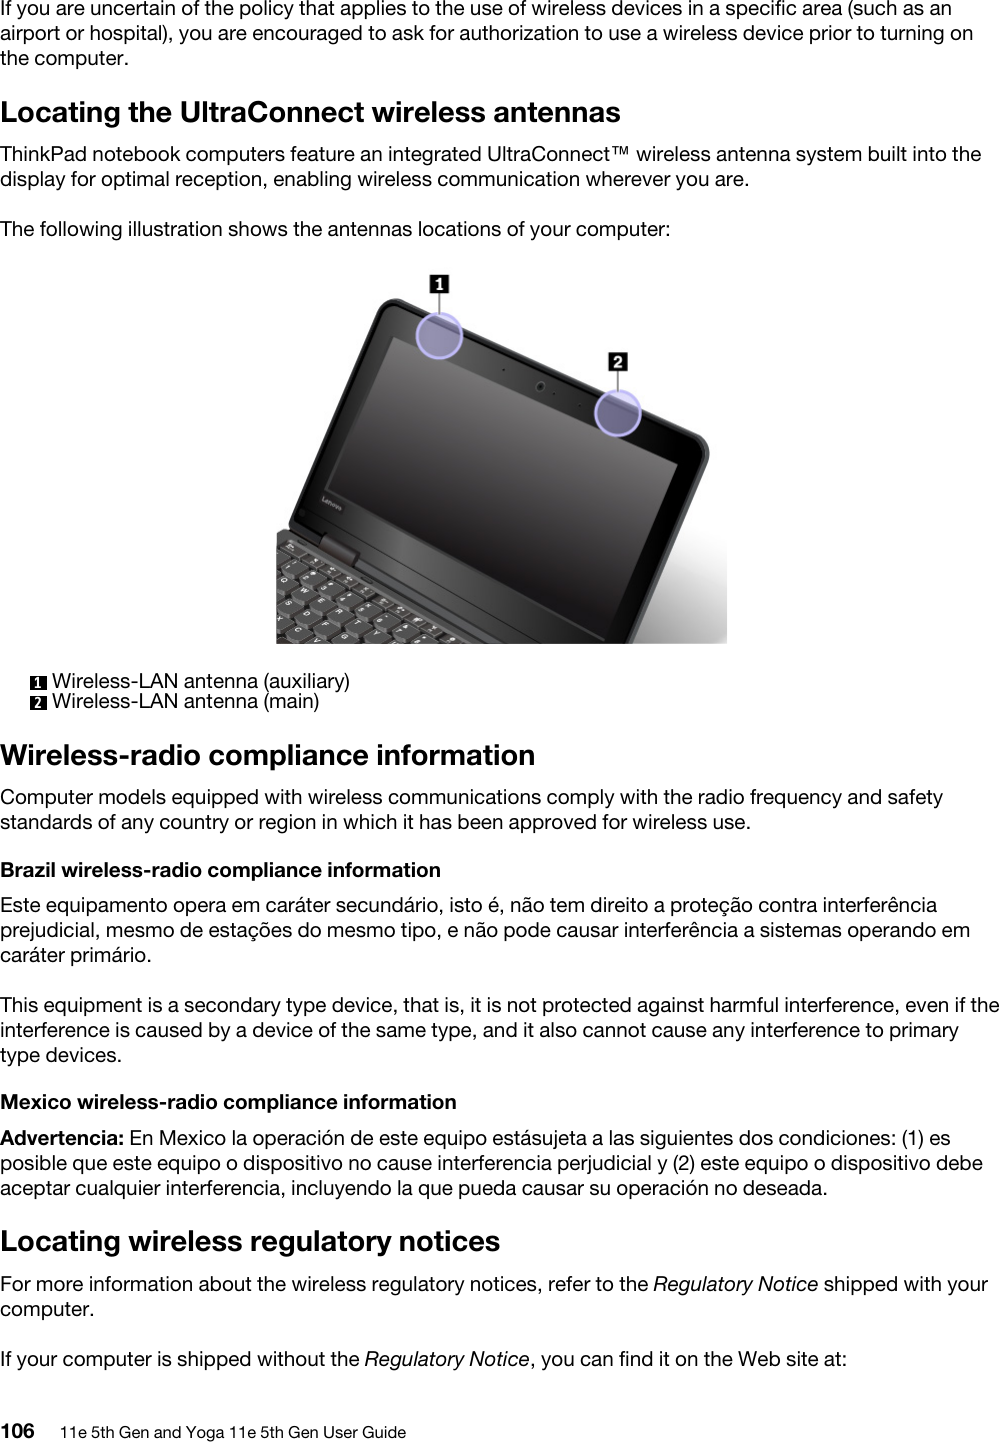 If you are uncertain of the policy that applies to the use of wireless devices in a specific area (such as an airport or hospital), you are encouraged to ask for authorization to use a wireless device prior to turning on the computer.Locating the UltraConnect wireless antennasThinkPad notebook computers feature an integrated UltraConnect™ wireless antenna system built into the display for optimal reception, enabling wireless communication wherever you are.The following illustration shows the antennas locations of your computer: 1  Wireless-LAN antenna (auxiliary)2  Wireless-LAN antenna (main)Wireless-radio compliance informationComputer models equipped with wireless communications comply with the radio frequency and safety standards of any country or region in which it has been approved for wireless use.Brazil wireless-radio compliance informationEste equipamento opera em caráter secundário, isto é, não tem direito a proteção contra interferência prejudicial, mesmo de estações do mesmo tipo, e não pode causar interferência a sistemas operando em caráter primário.This equipment is a secondary type device, that is, it is not protected against harmful interference, even if the interference is caused by a device of the same type, and it also cannot cause any interference to primary type devices.Mexico wireless-radio compliance informationAdvertencia: En Mexico la operación de este equipo estásujeta a las siguientes dos condiciones: (1) es posible que este equipo o dispositivo no cause interferencia perjudicial y (2) este equipo o dispositivo debe aceptar cualquier interferencia, incluyendo la que pueda causar su operación no deseada.Locating wireless regulatory noticesFor more information about the wireless regulatory notices, refer to the Regulatory Notice shipped with your computer.If your computer is shipped without the Regulatory Notice, you can find it on the Web site at: 106 11e 5th Gen and Yoga 11e 5th Gen User Guide